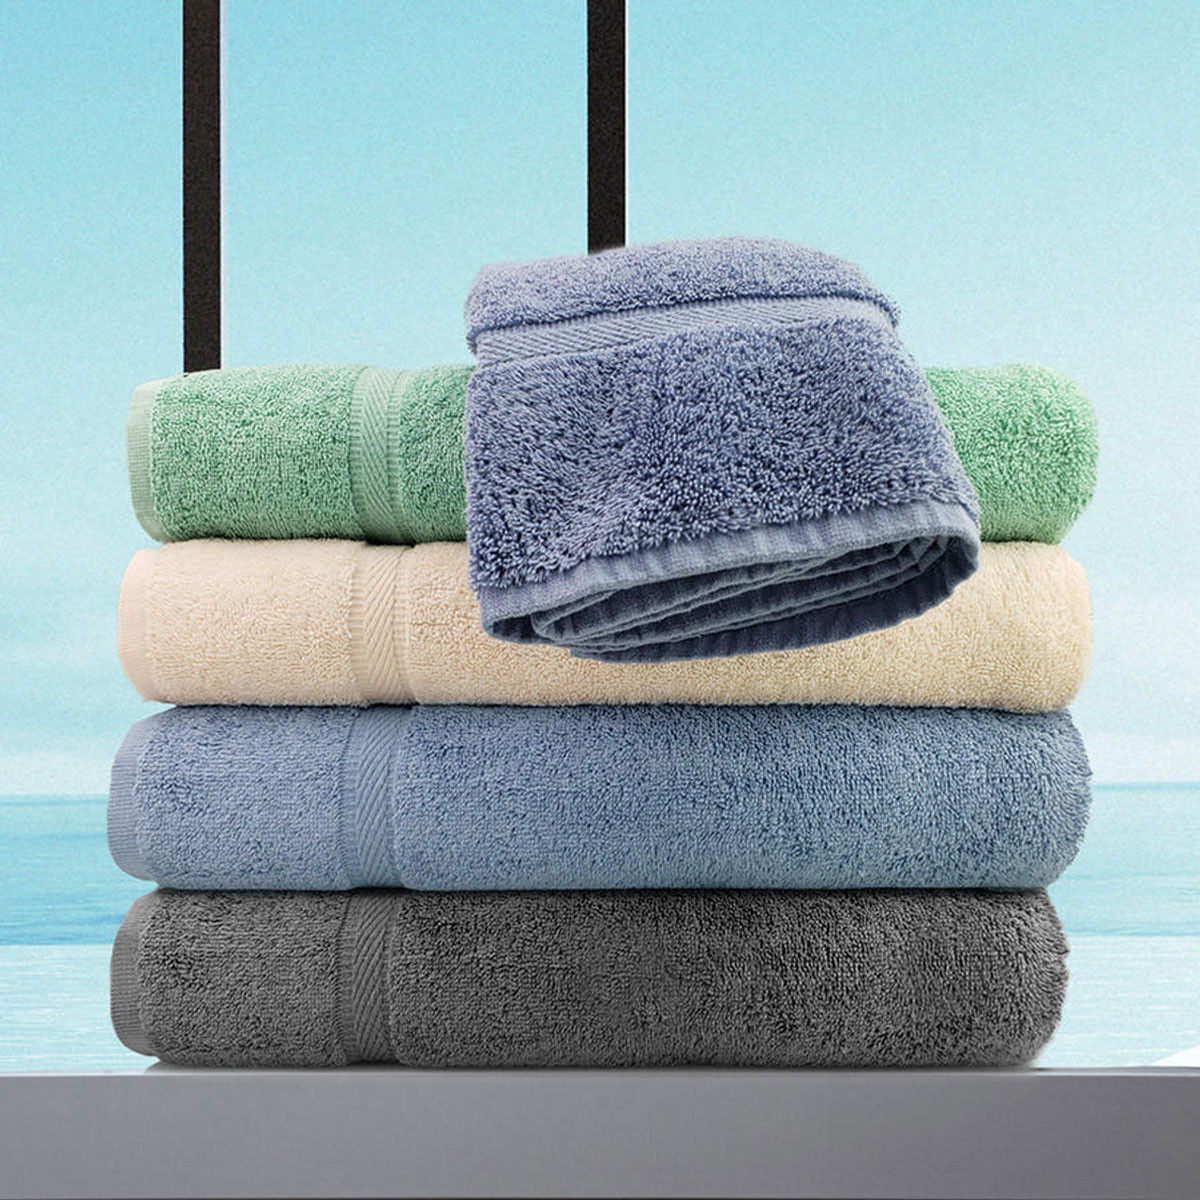 Can you confirm the color of the Oxford Imperiale Towels, specifically the Charcoal Grey ones?